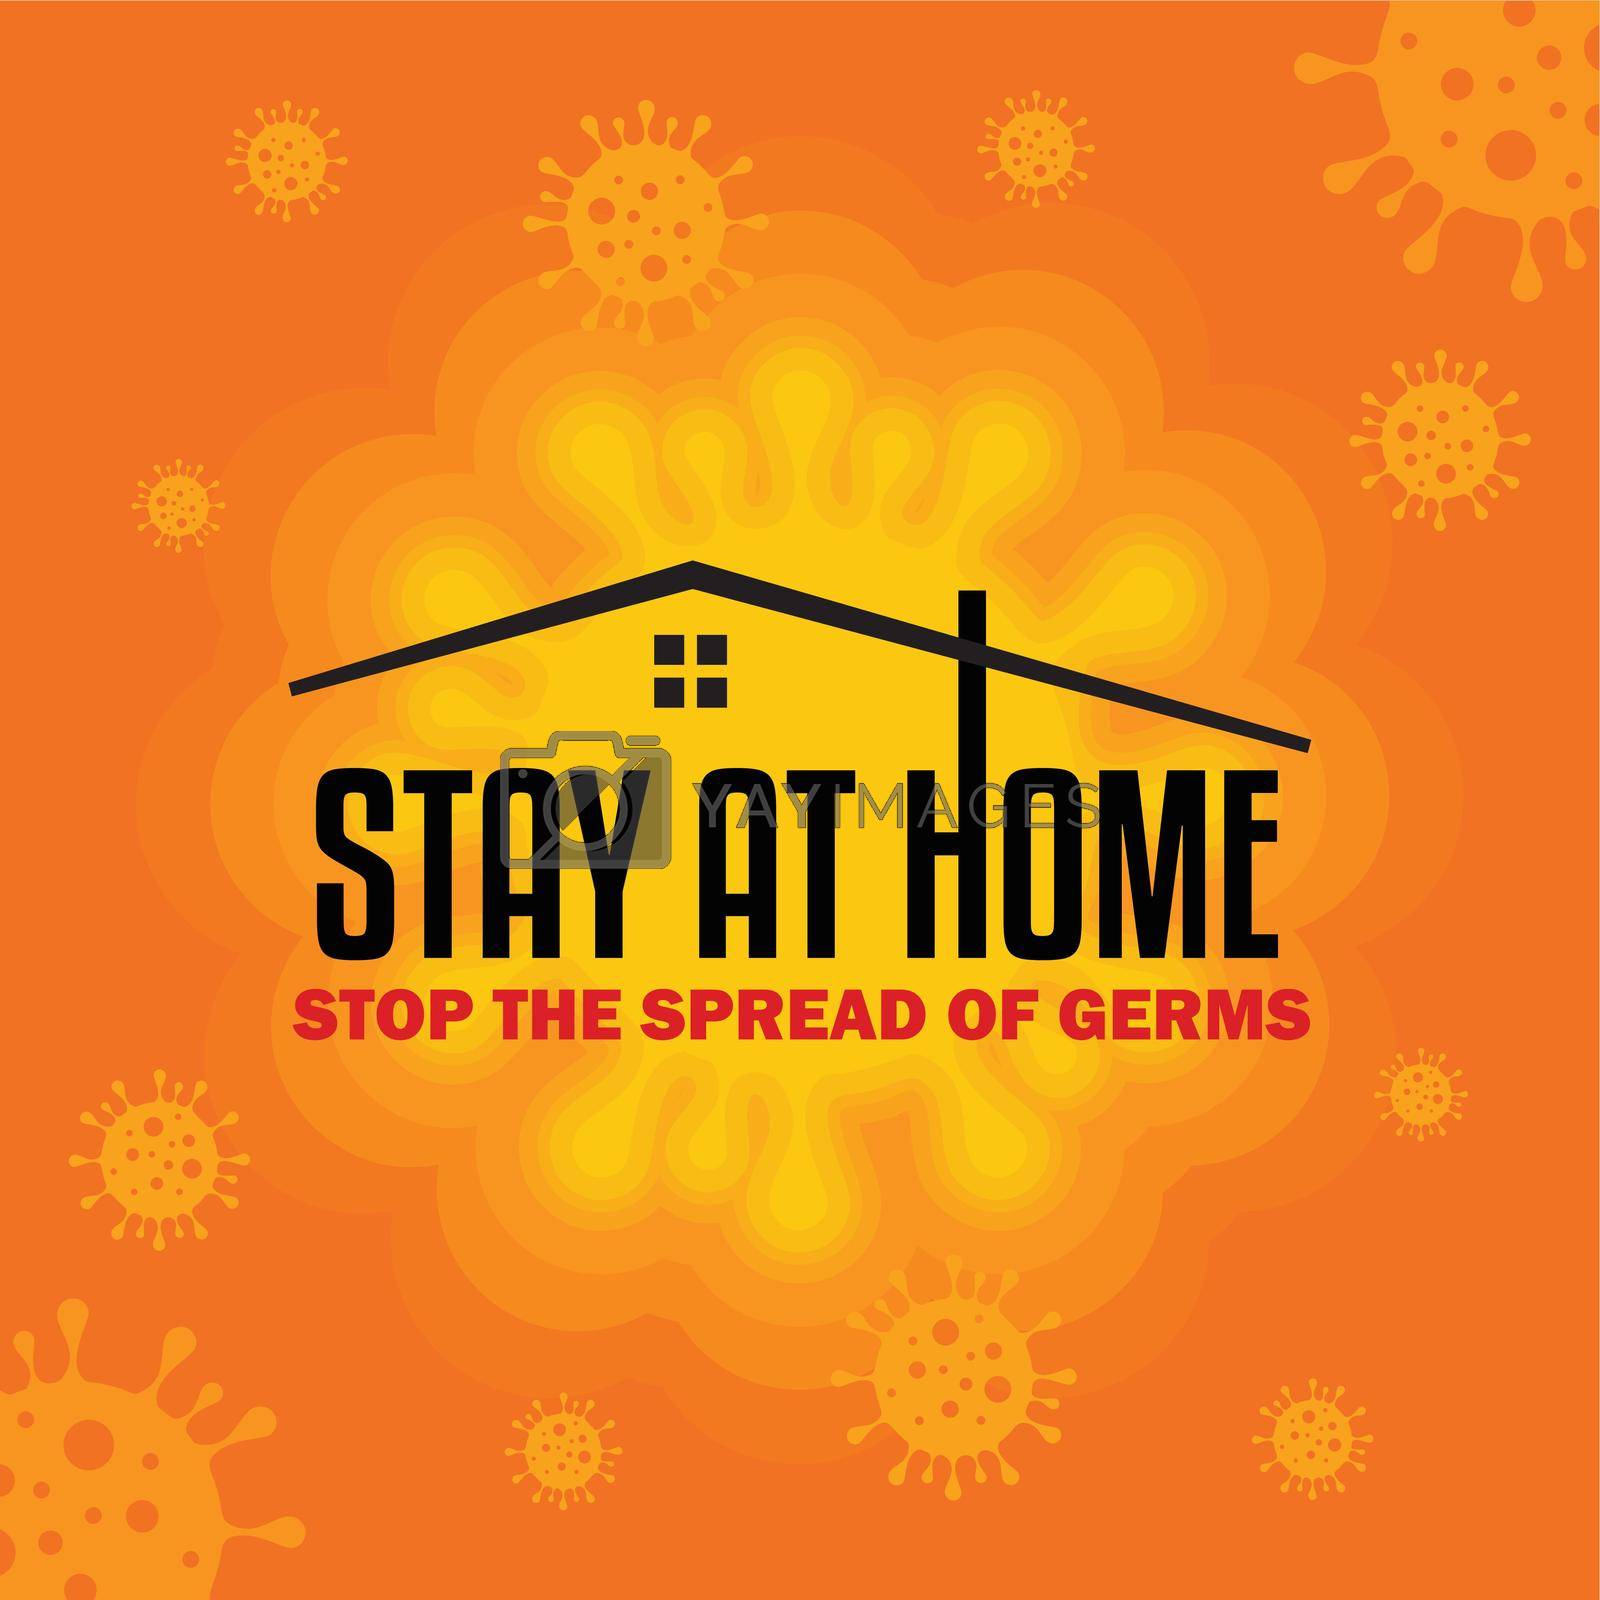 Royalty free image of Stay at home to stop the spread of Germs  by Up2date